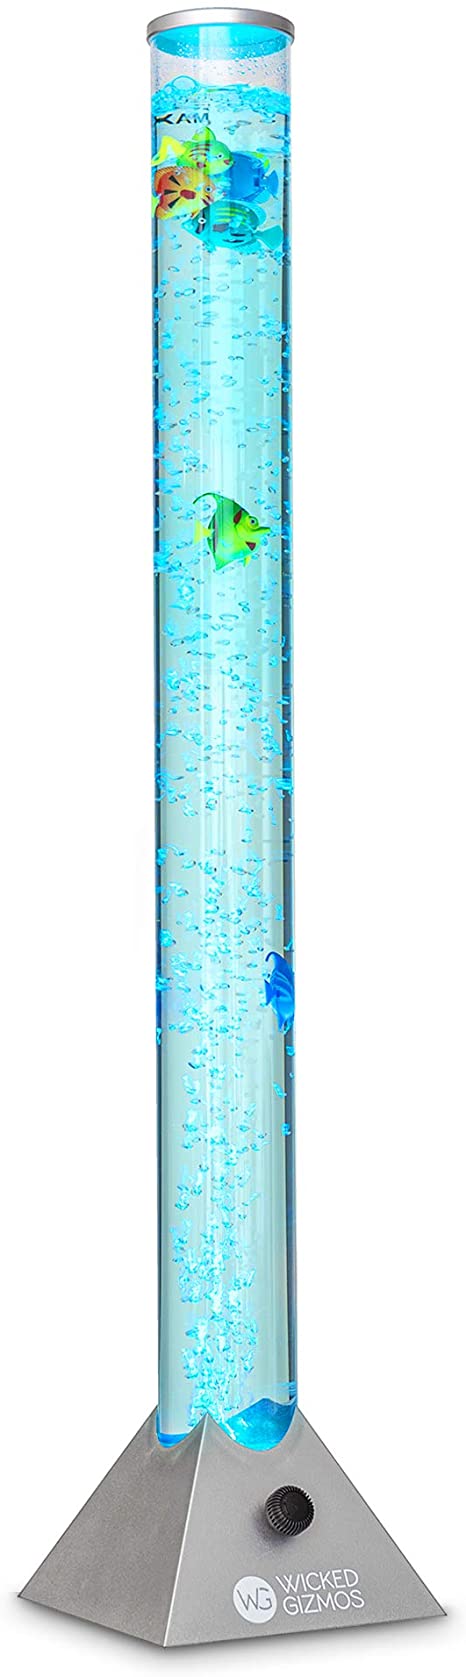 Wicked GIZMOS Large Colour Changing Bubble Lamp LED Light Tubular Freestanding Design with Bubbles and Fish (90cm)